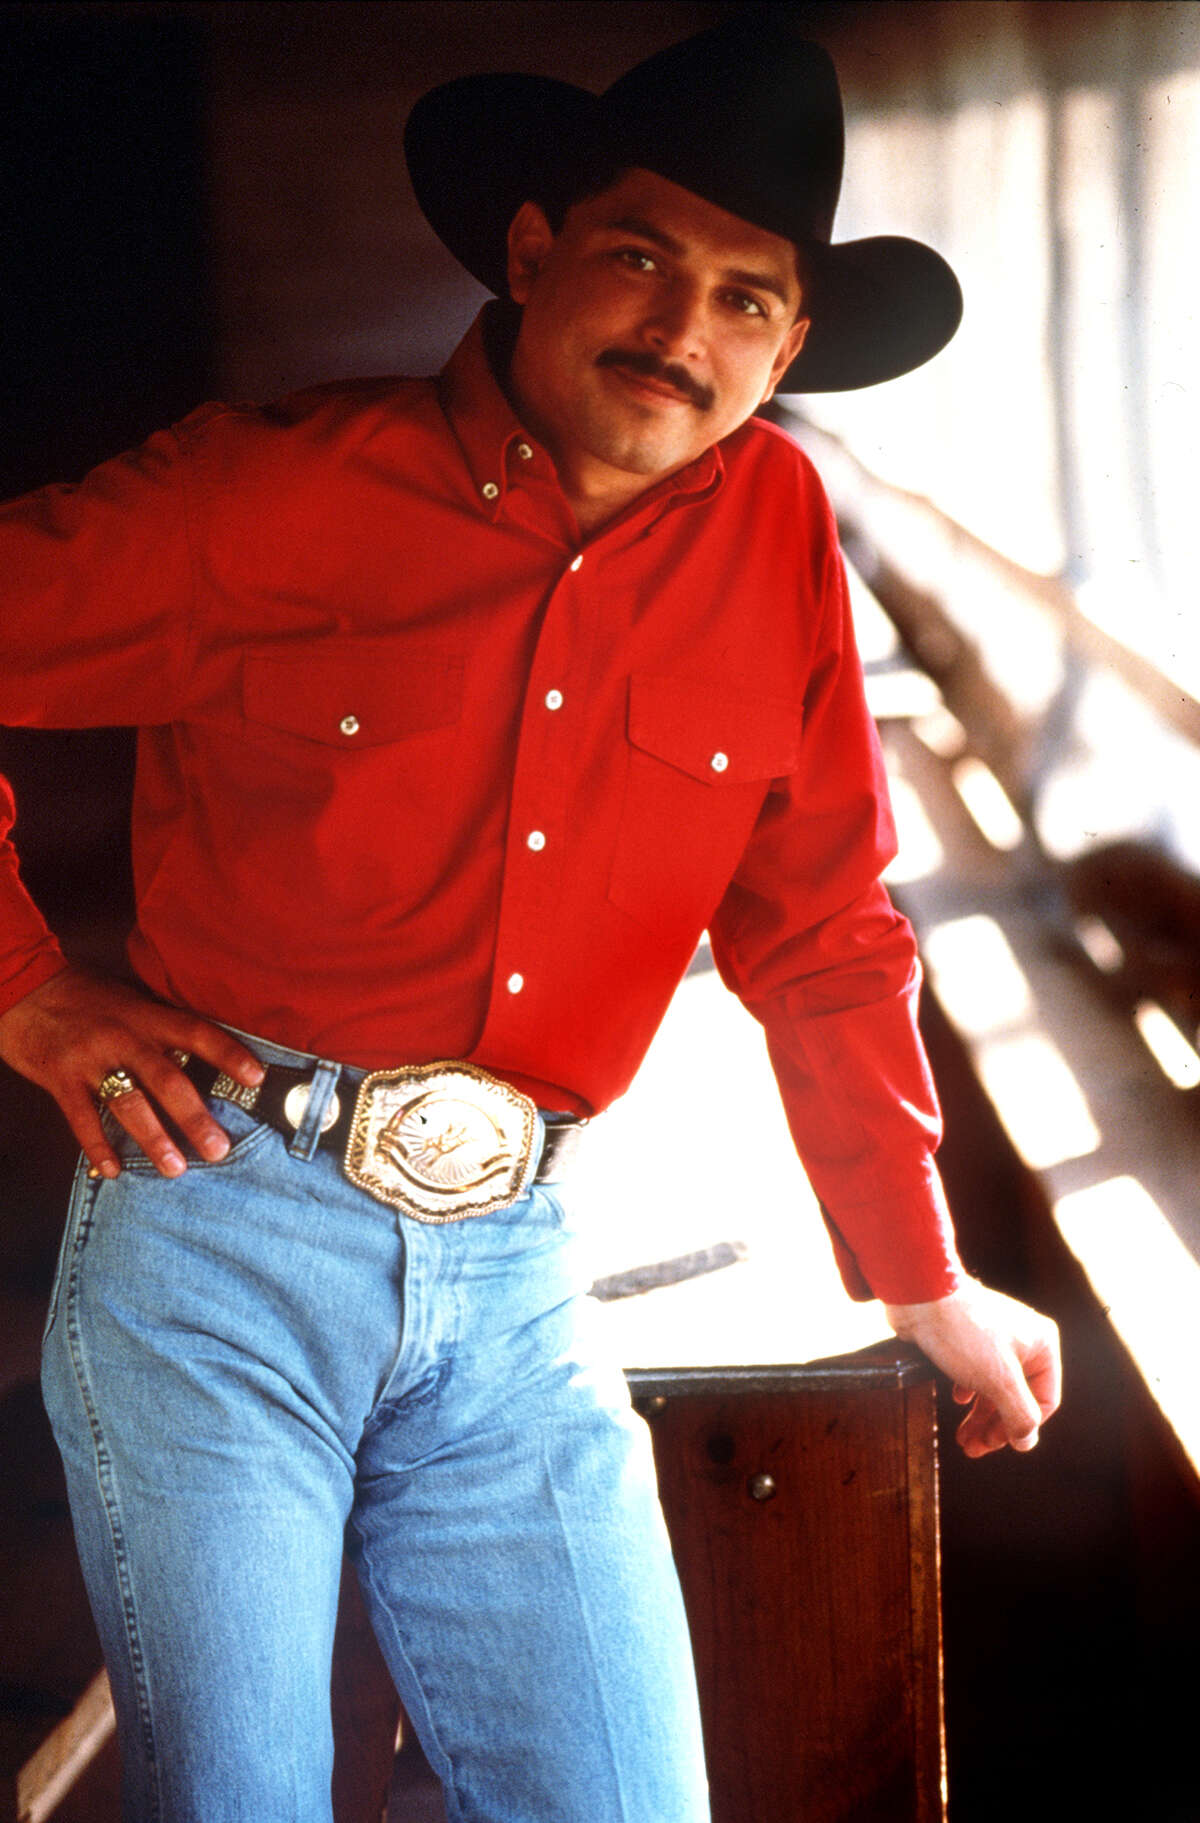 Emilio Navaira went to Nashville to start a country music career in the mid-’80s.